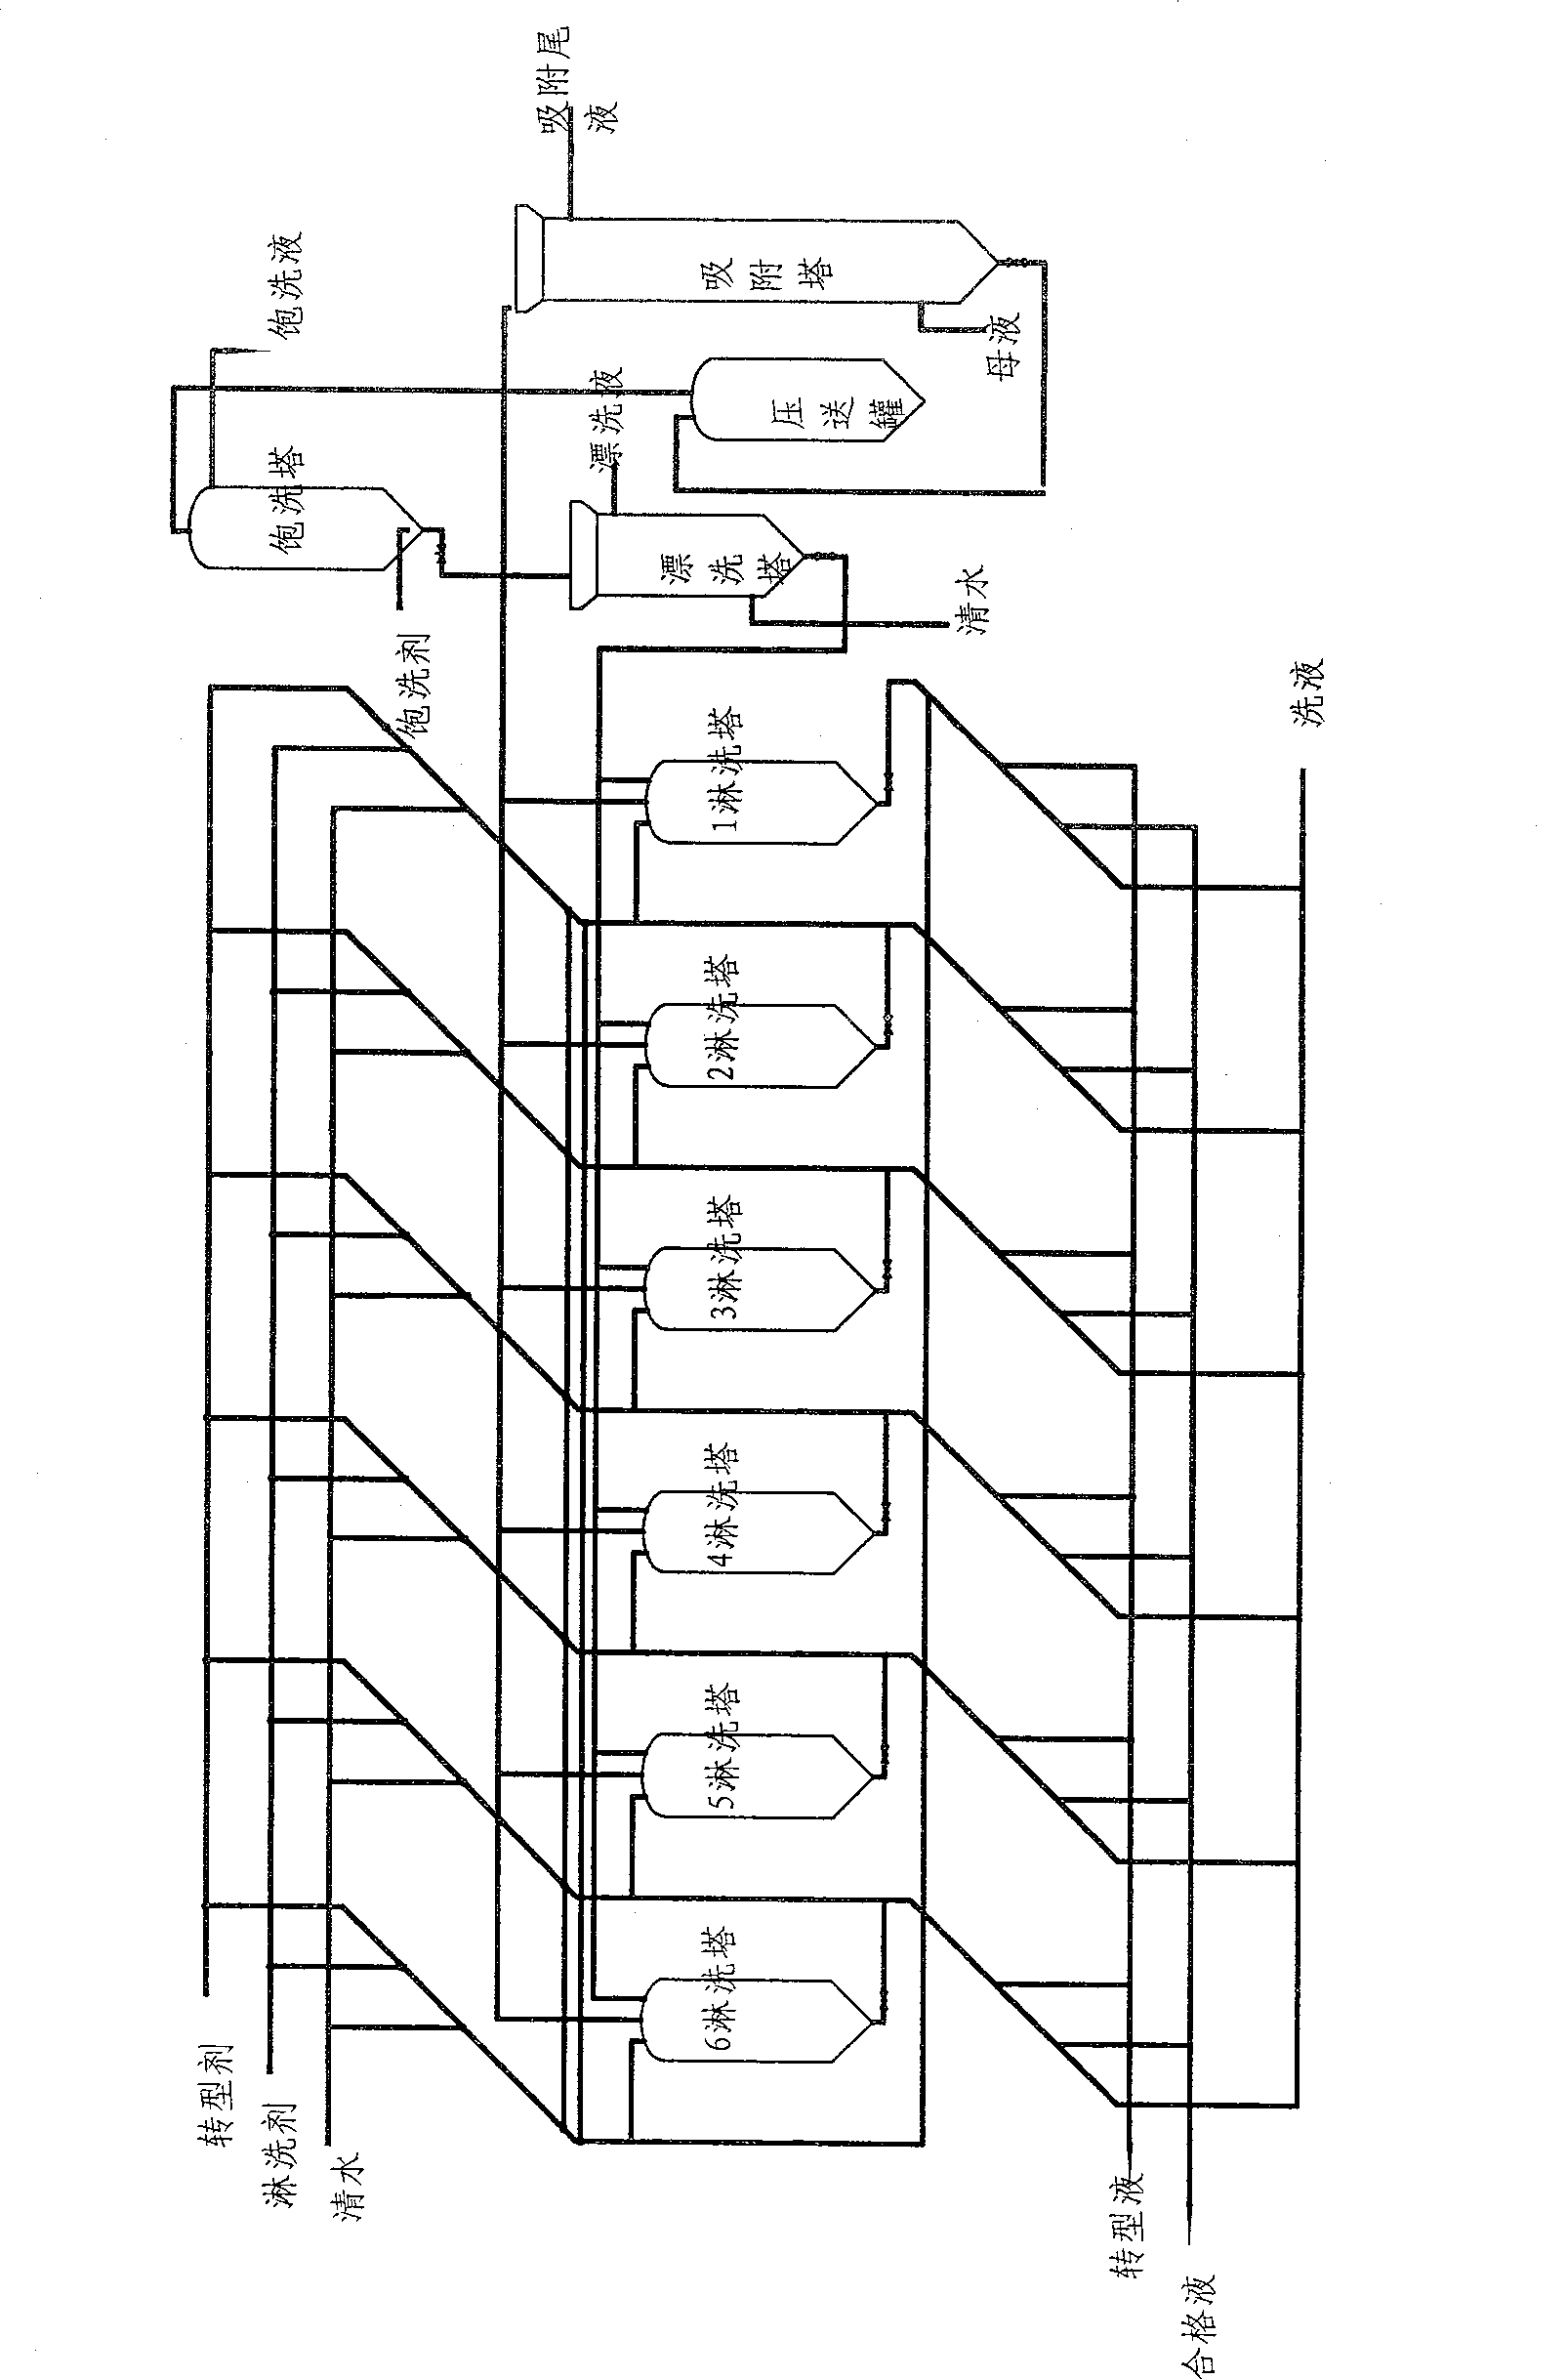 Ion exchanging method for extracting gallium from alumina production process